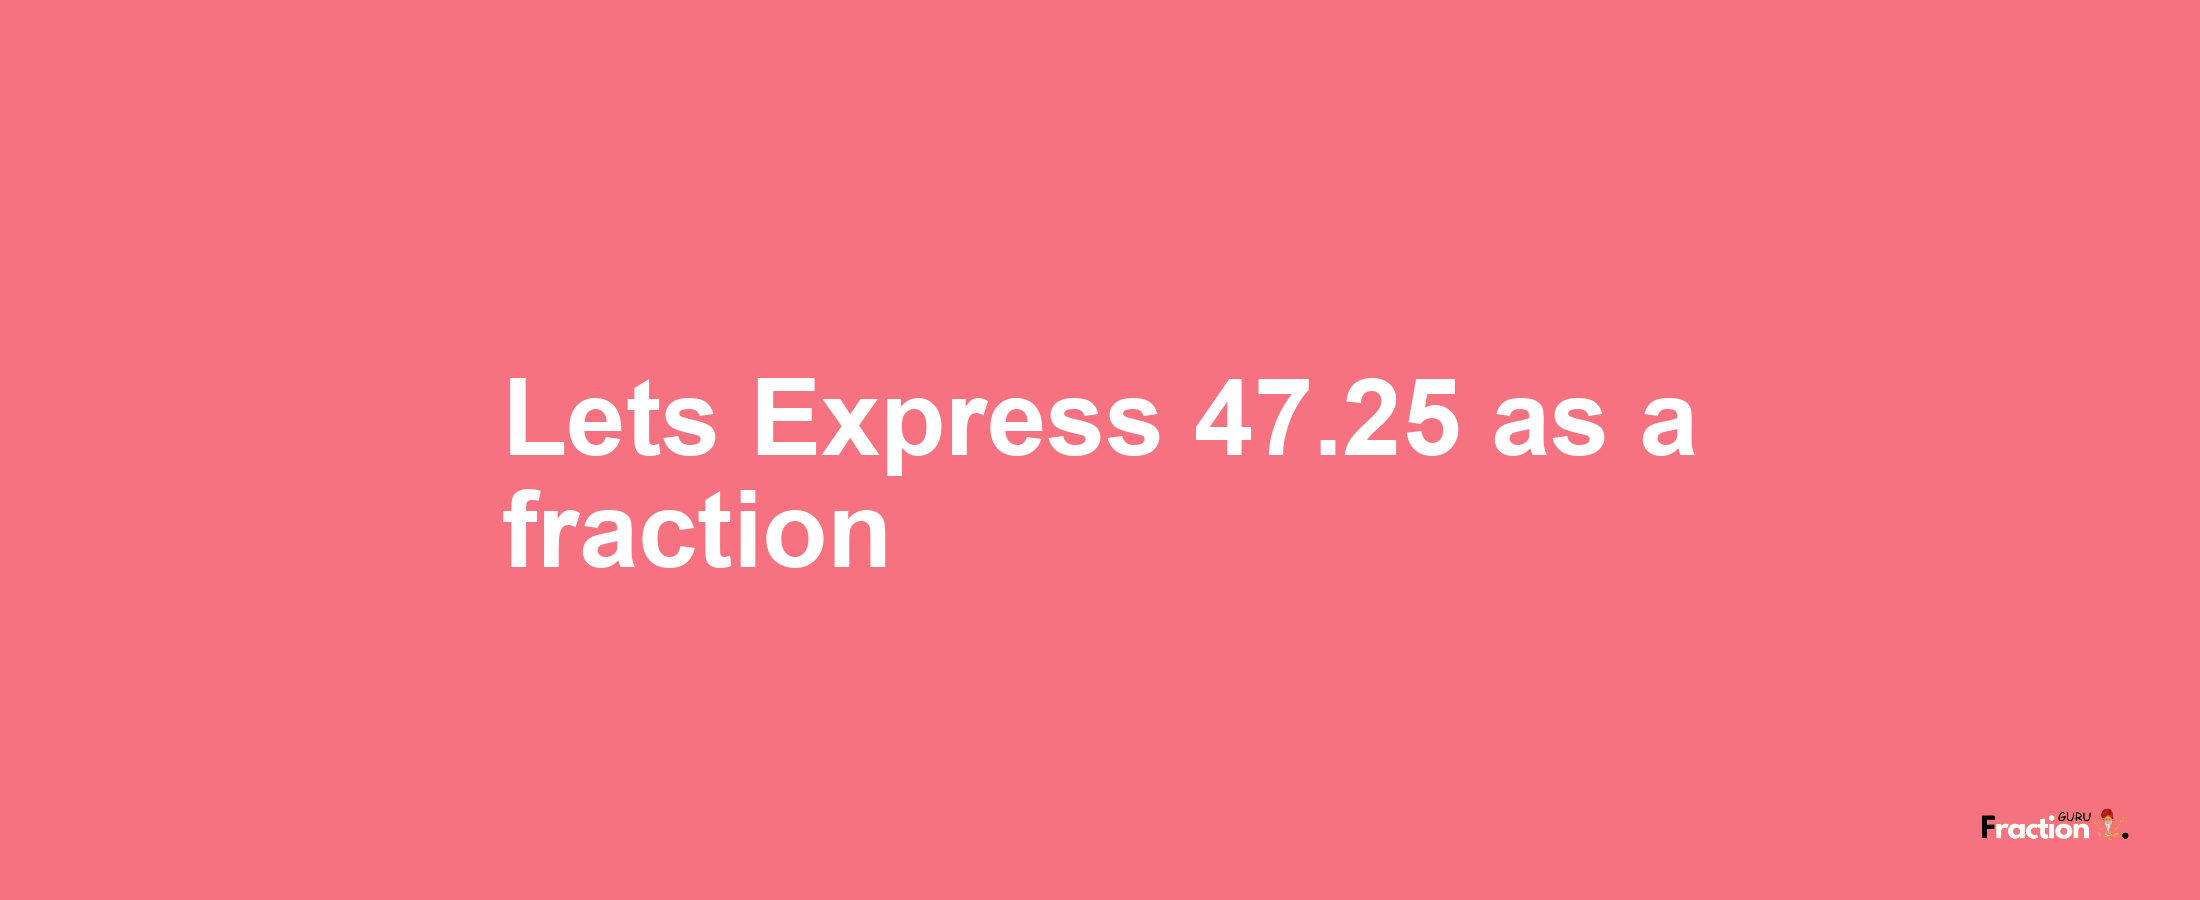 Lets Express 47.25 as afraction